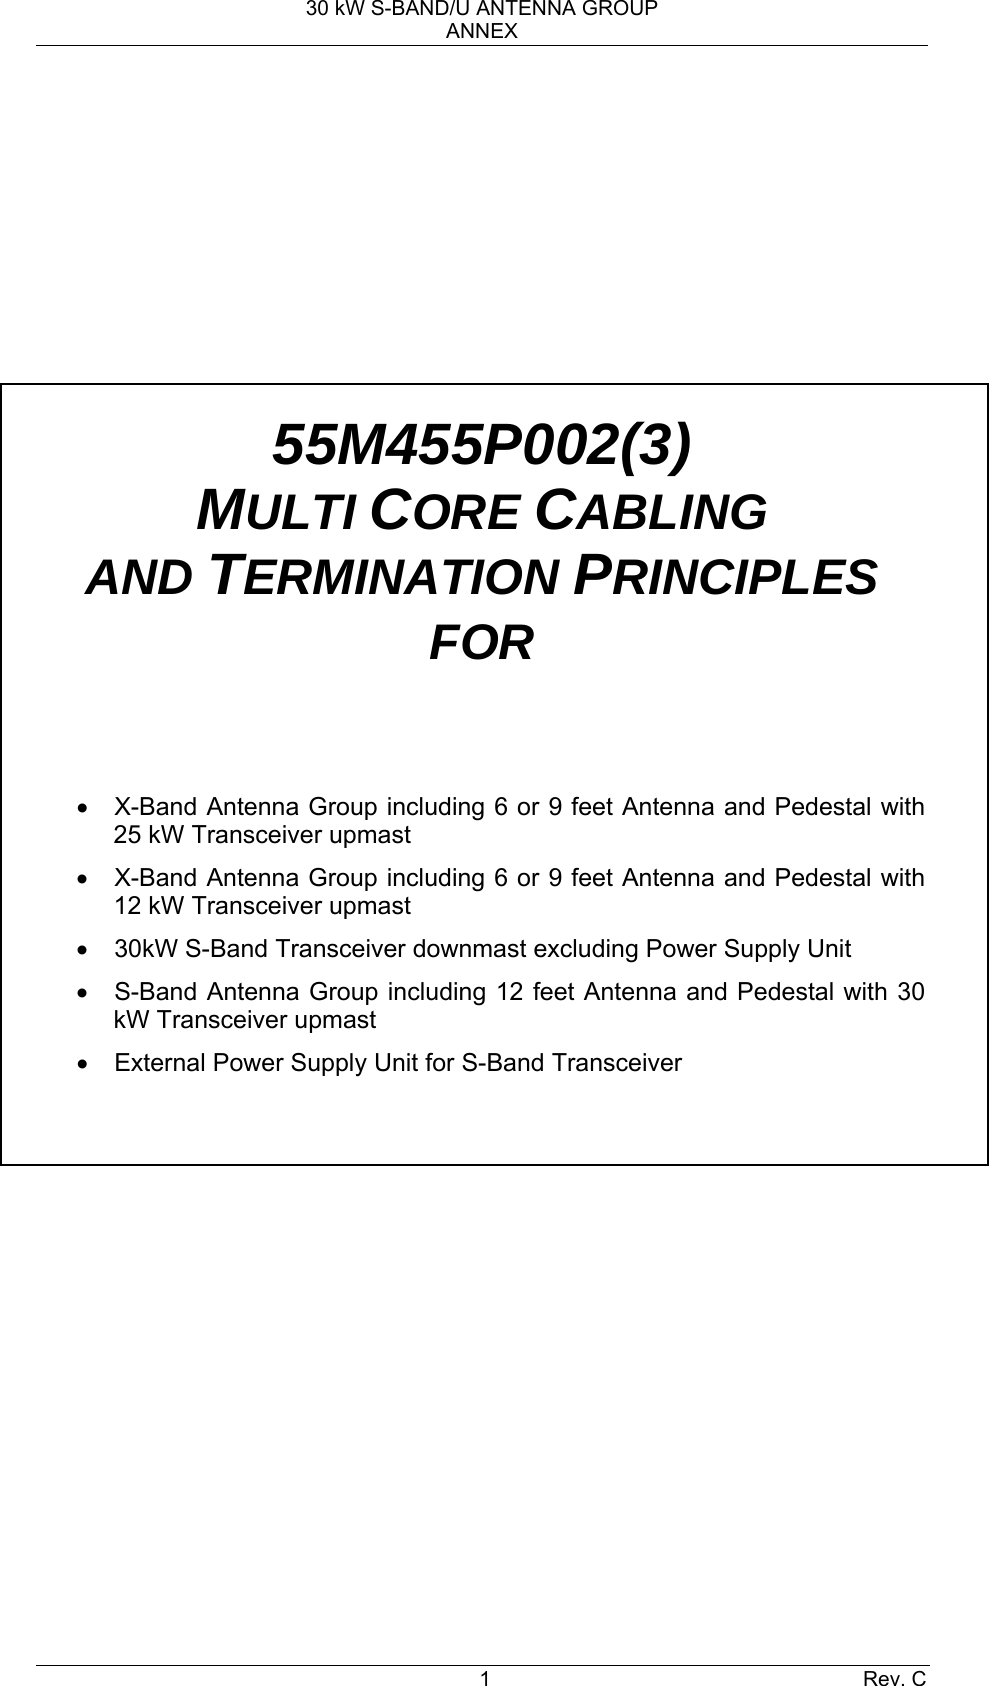 30 kW S-BAND/U ANTENNA GROUP ANNEX 1 Rev. C      55M455P002(3) MULTI CORE CABLING AND TERMINATION PRINCIPLES FOR   •  X-Band Antenna Group including 6 or 9 feet Antenna and Pedestal with 25 kW Transceiver upmast •  X-Band Antenna Group including 6 or 9 feet Antenna and Pedestal with 12 kW Transceiver upmast •  30kW S-Band Transceiver downmast excluding Power Supply Unit •  S-Band Antenna Group including 12 feet Antenna and Pedestal with 30 kW Transceiver upmast •  External Power Supply Unit for S-Band Transceiver    